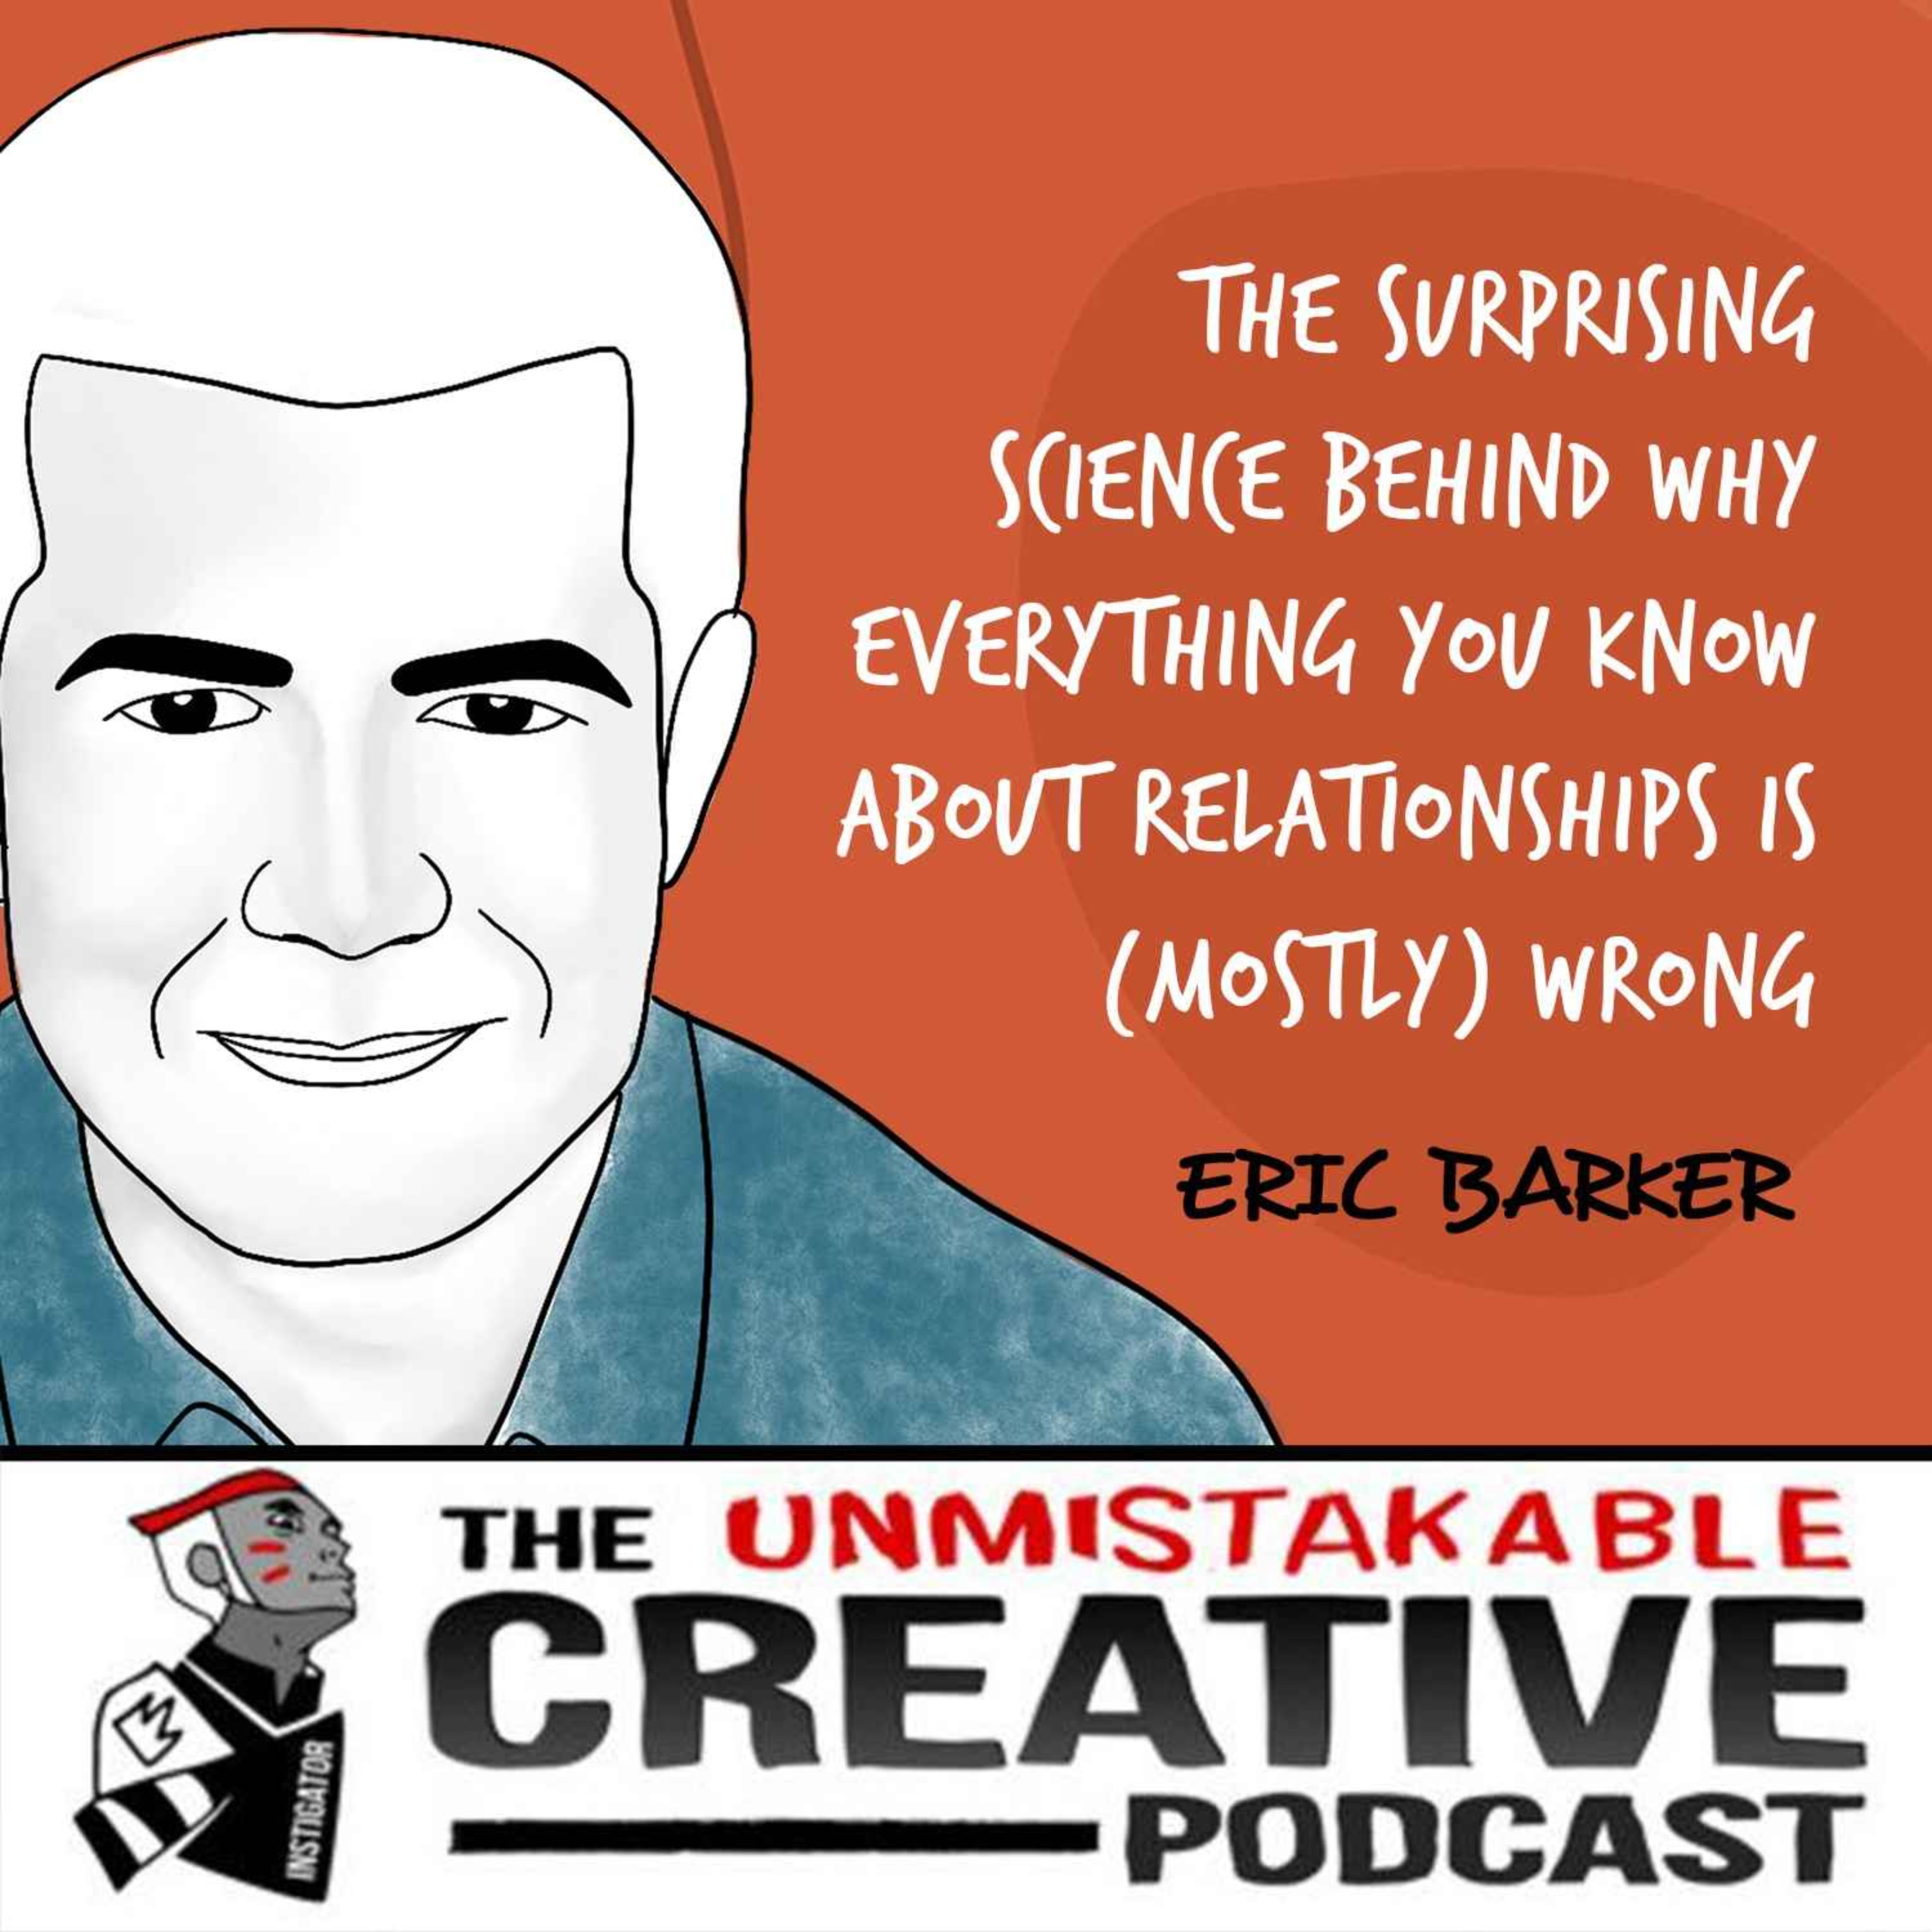 Best of 2022: Eric Barker | The Surprising Science Behind Why Everything You Know About Relationships is (Mostly) Wrong Image